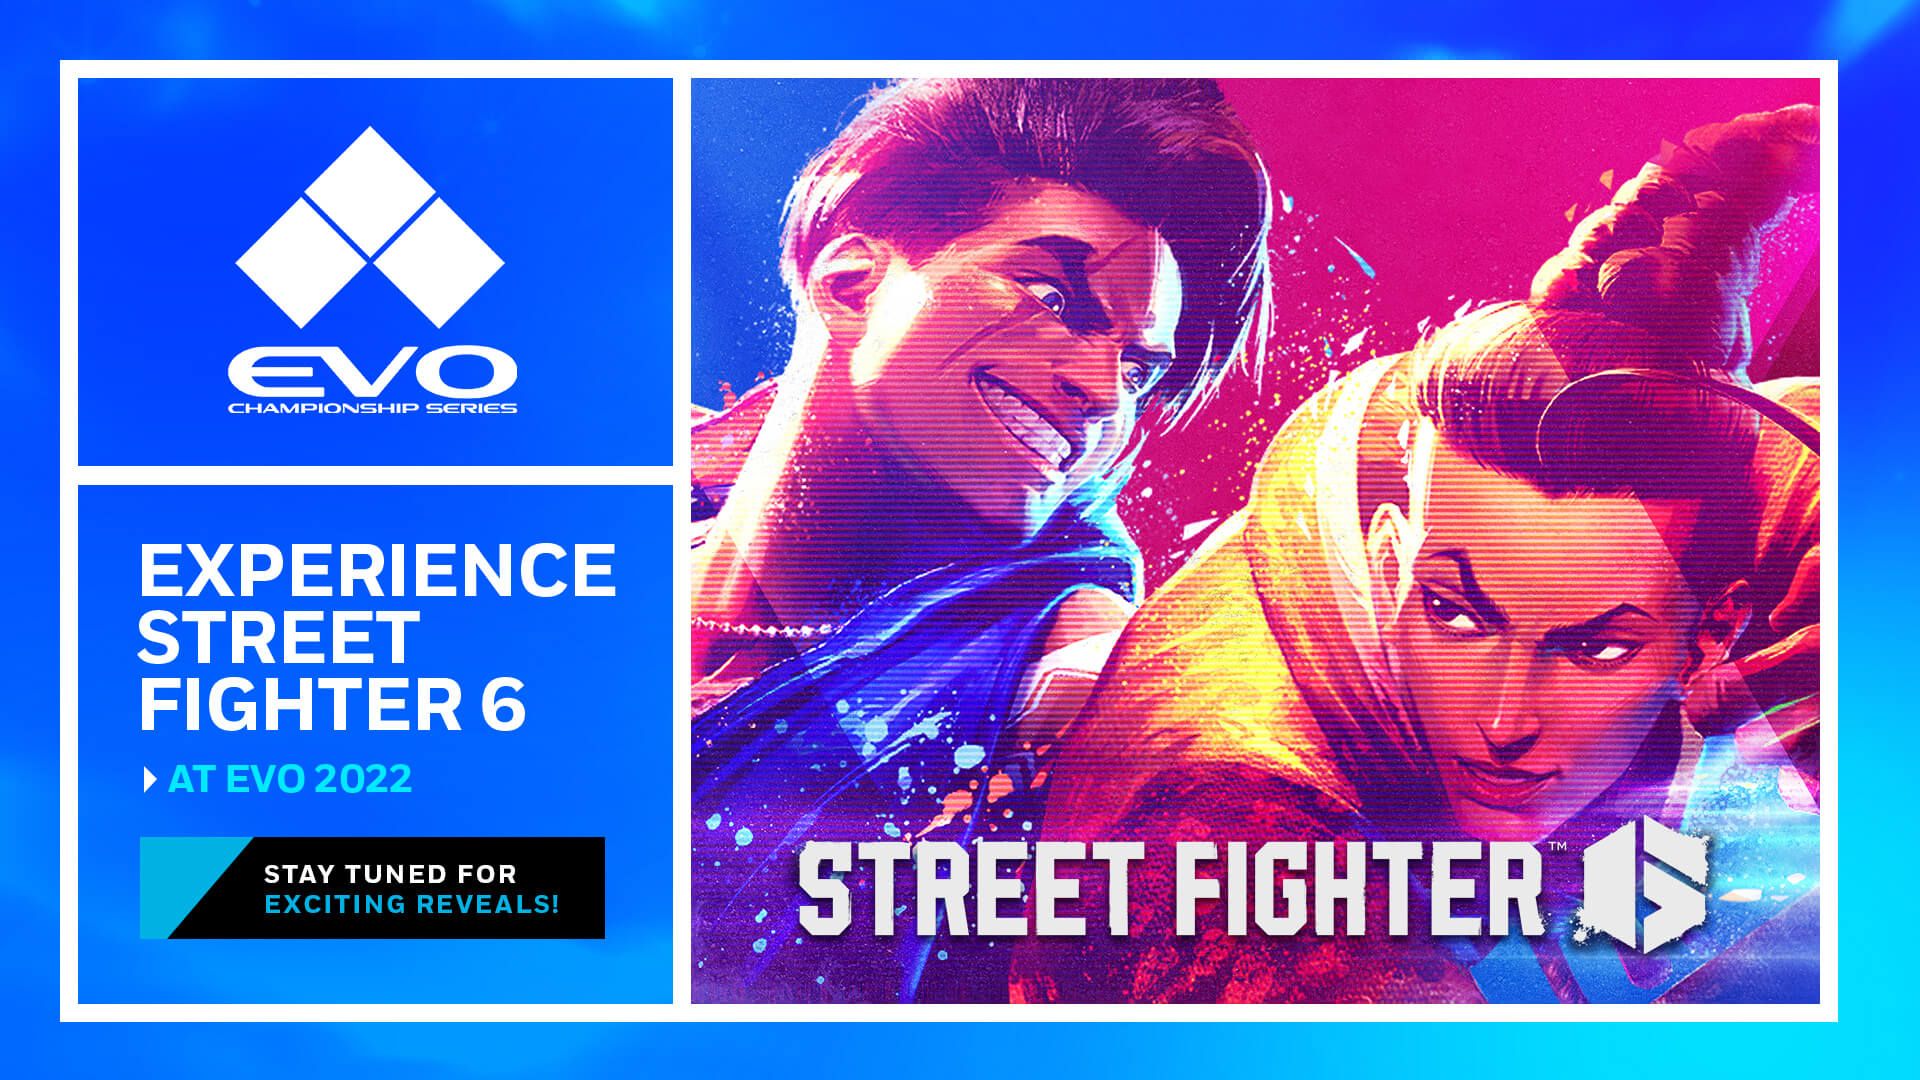 Street Fighter 6 Will Be Playable At Evo! More Announcements Planned